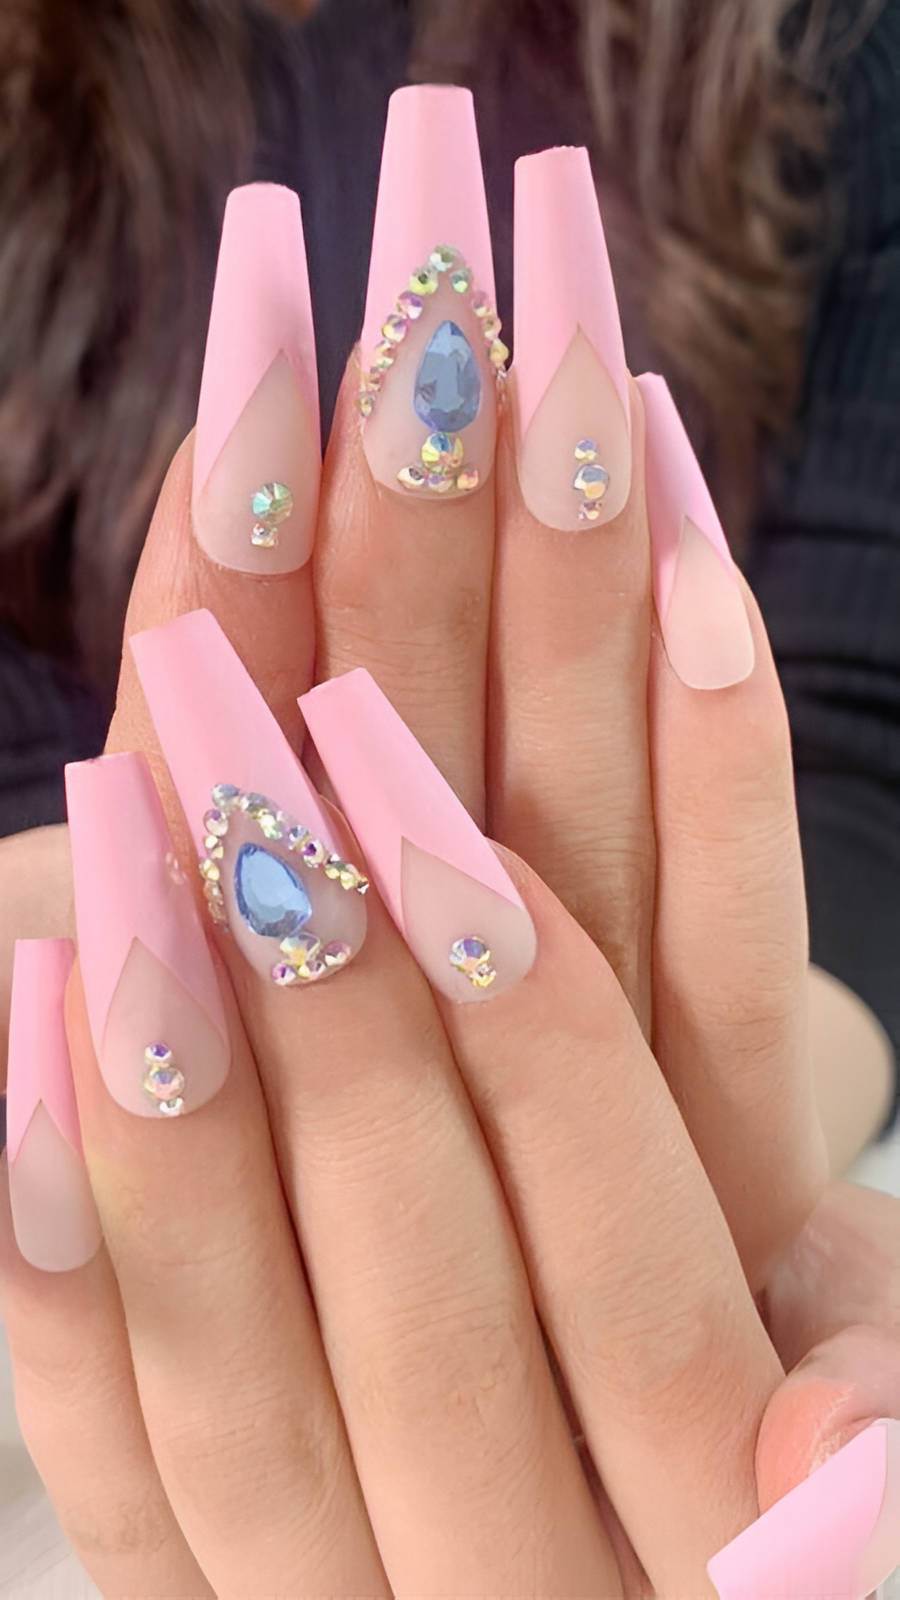 30 Stunning Square Nail Designs To Vamp Up Your Manicure Game - 211